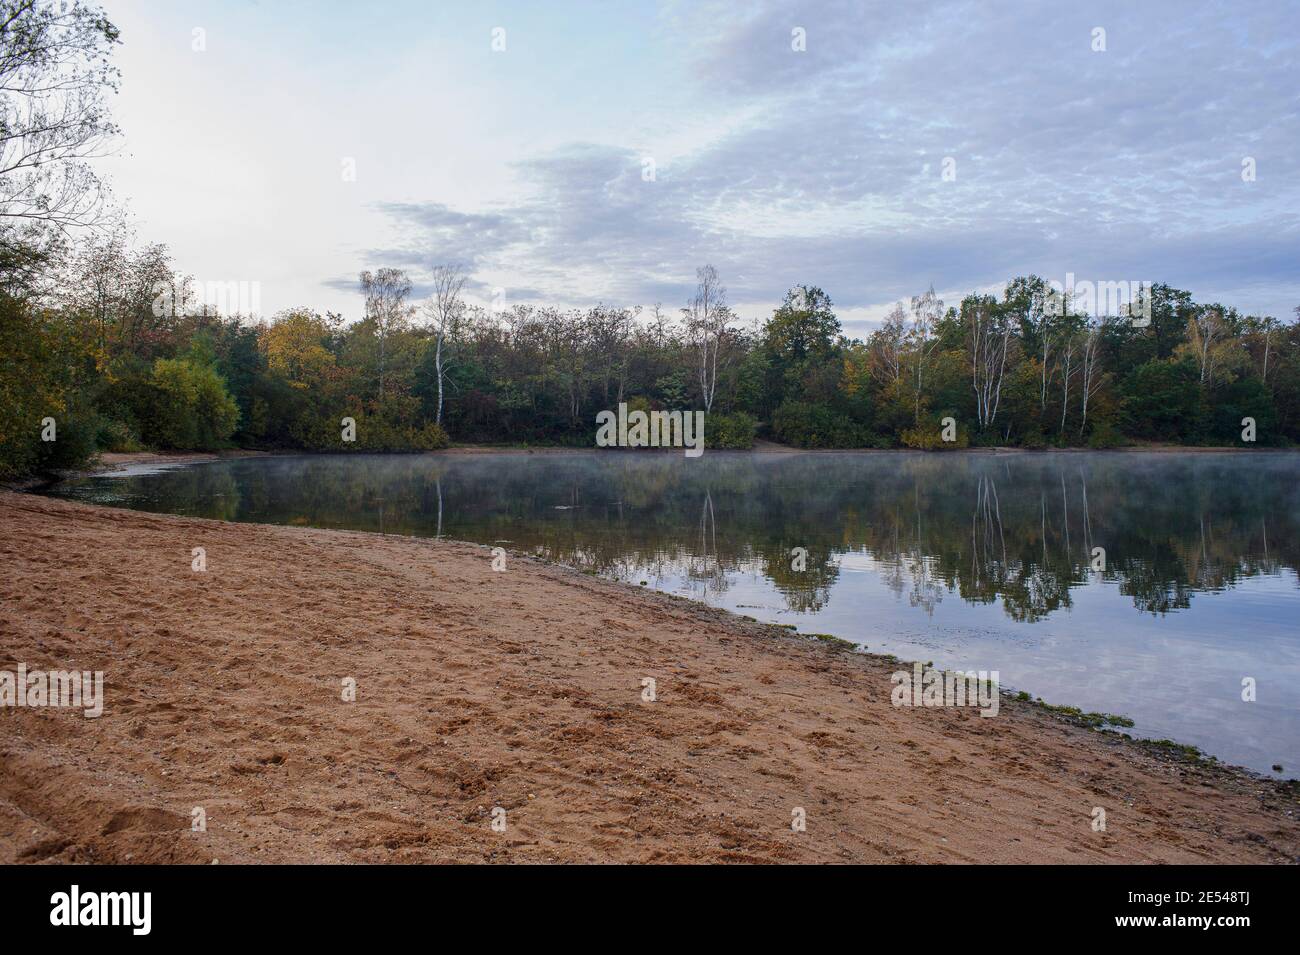 The beach of the amusement park is deserted. The trees on the shore are reflected in the calm water. A light mist rises in the cold morning air. Stock Photo